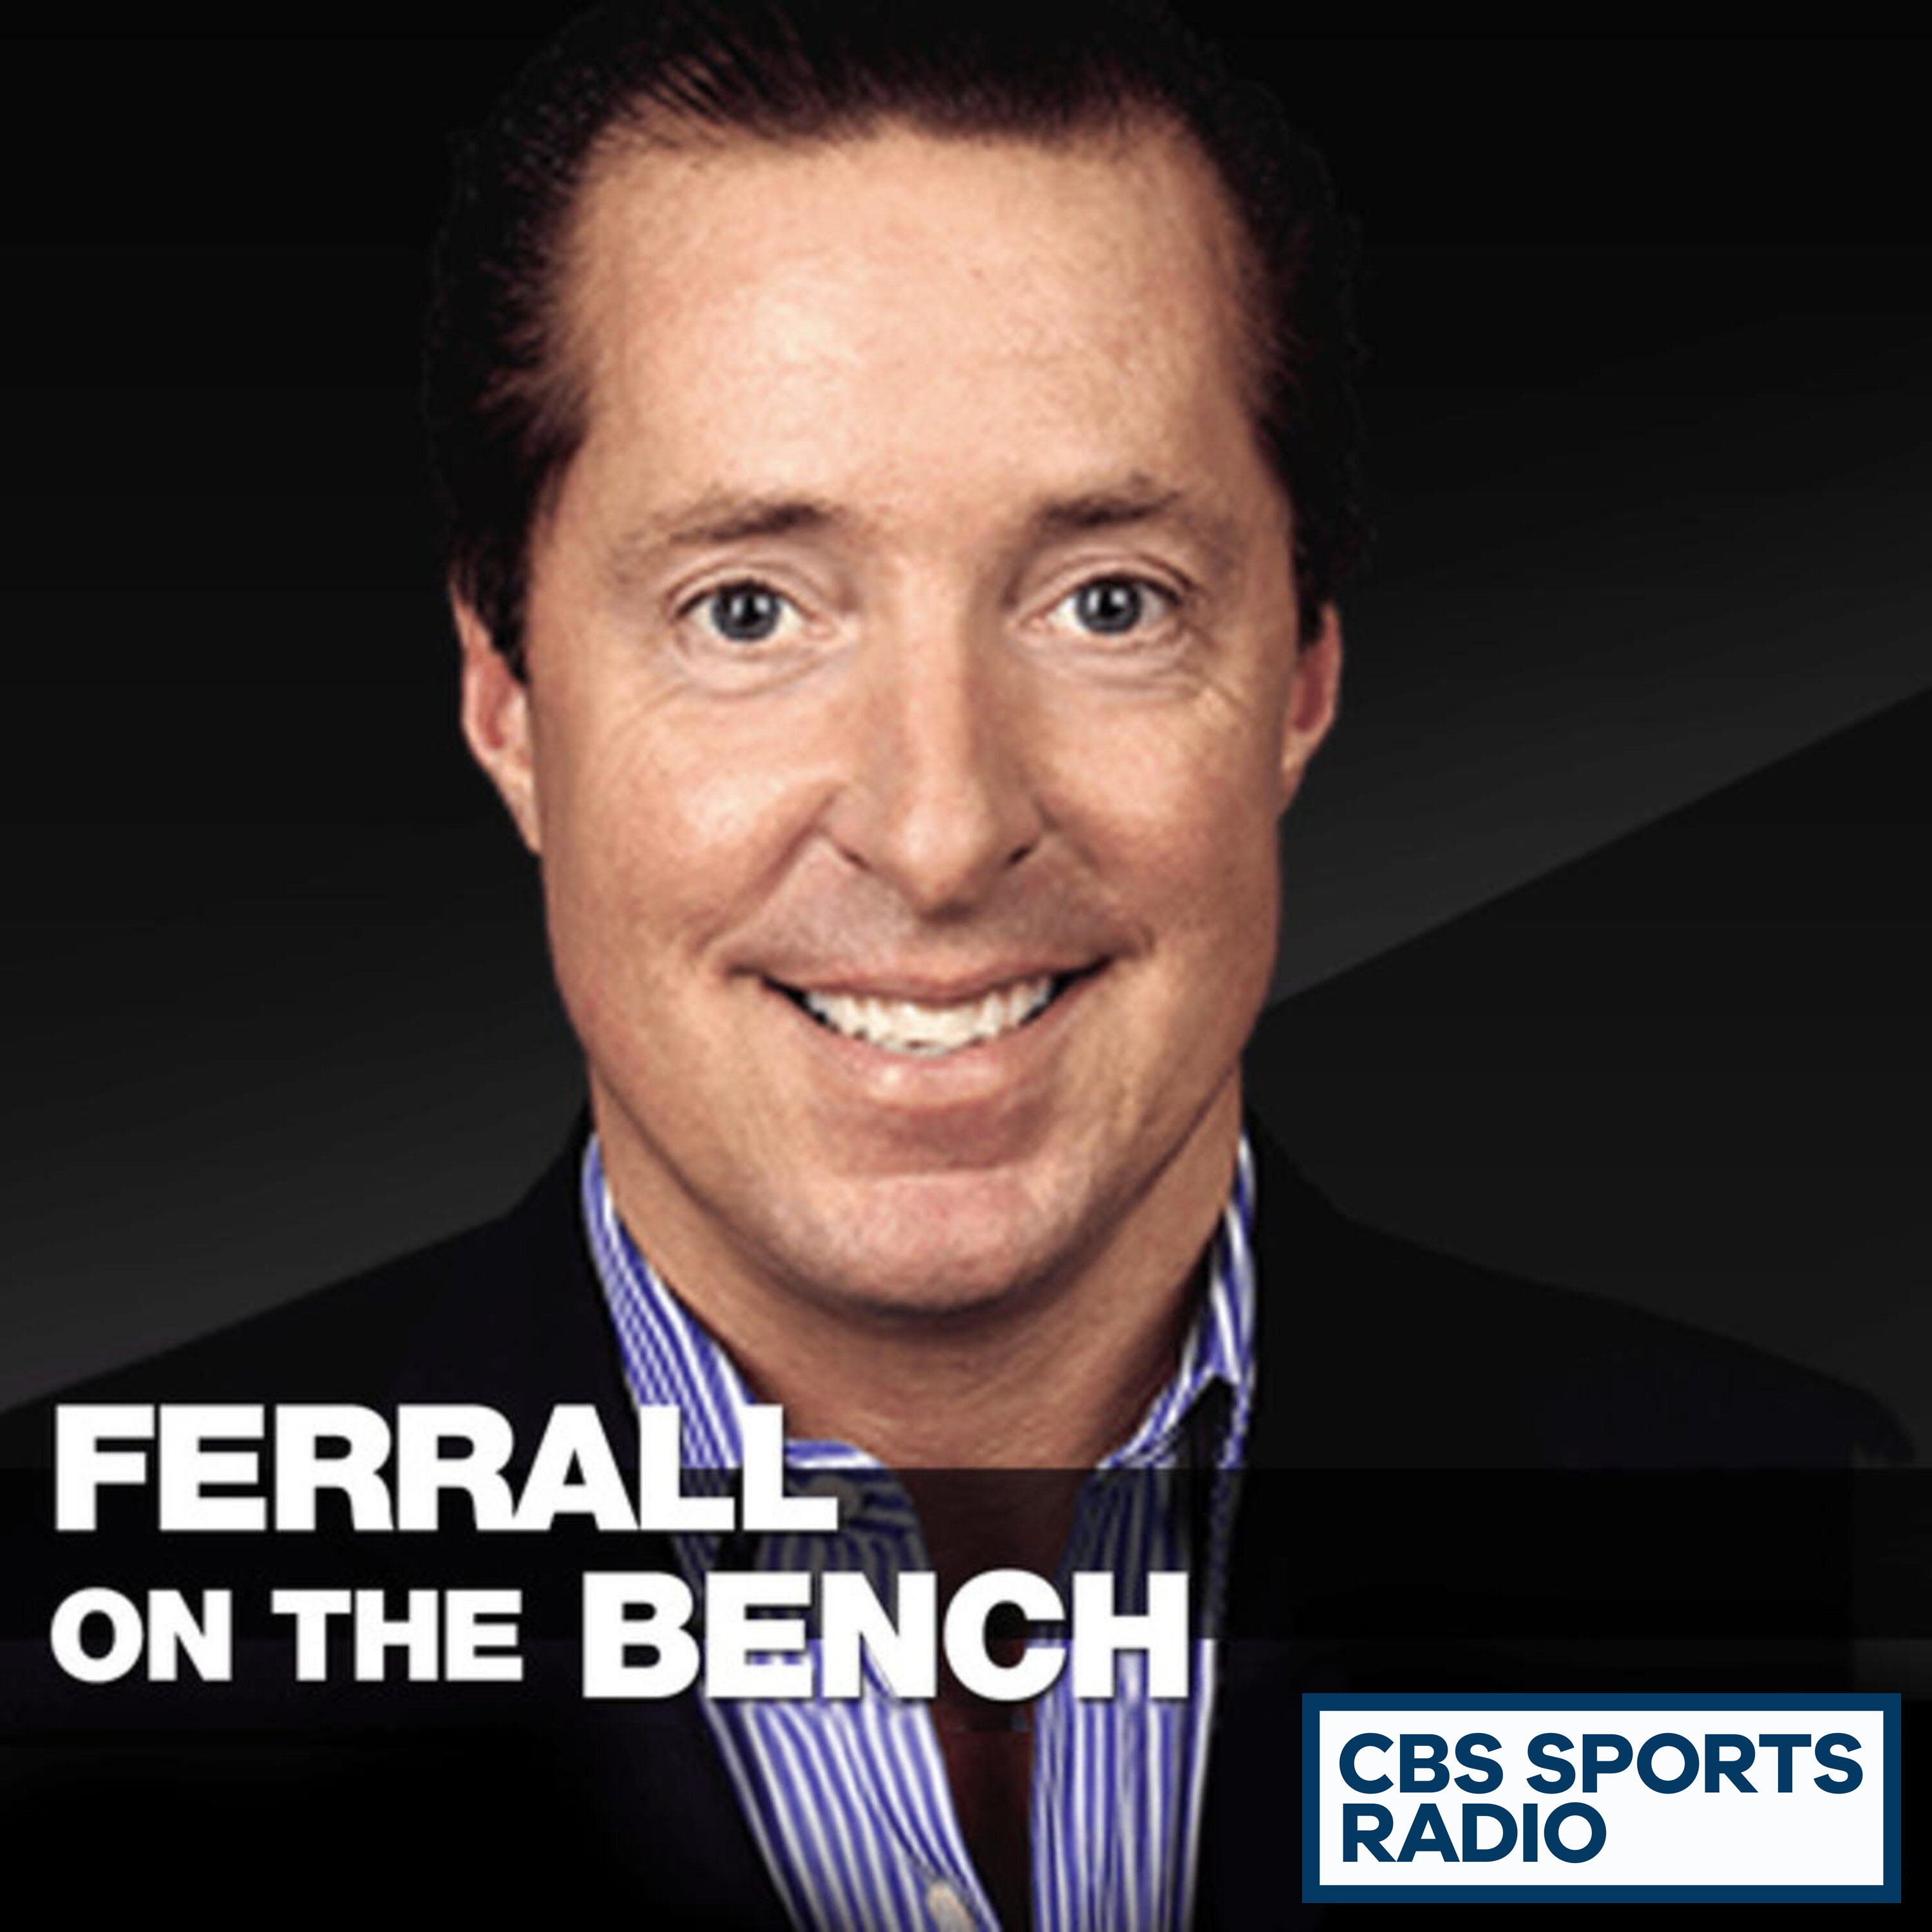 05-09-17 - Ferrall on the Bench - James Neal Interview